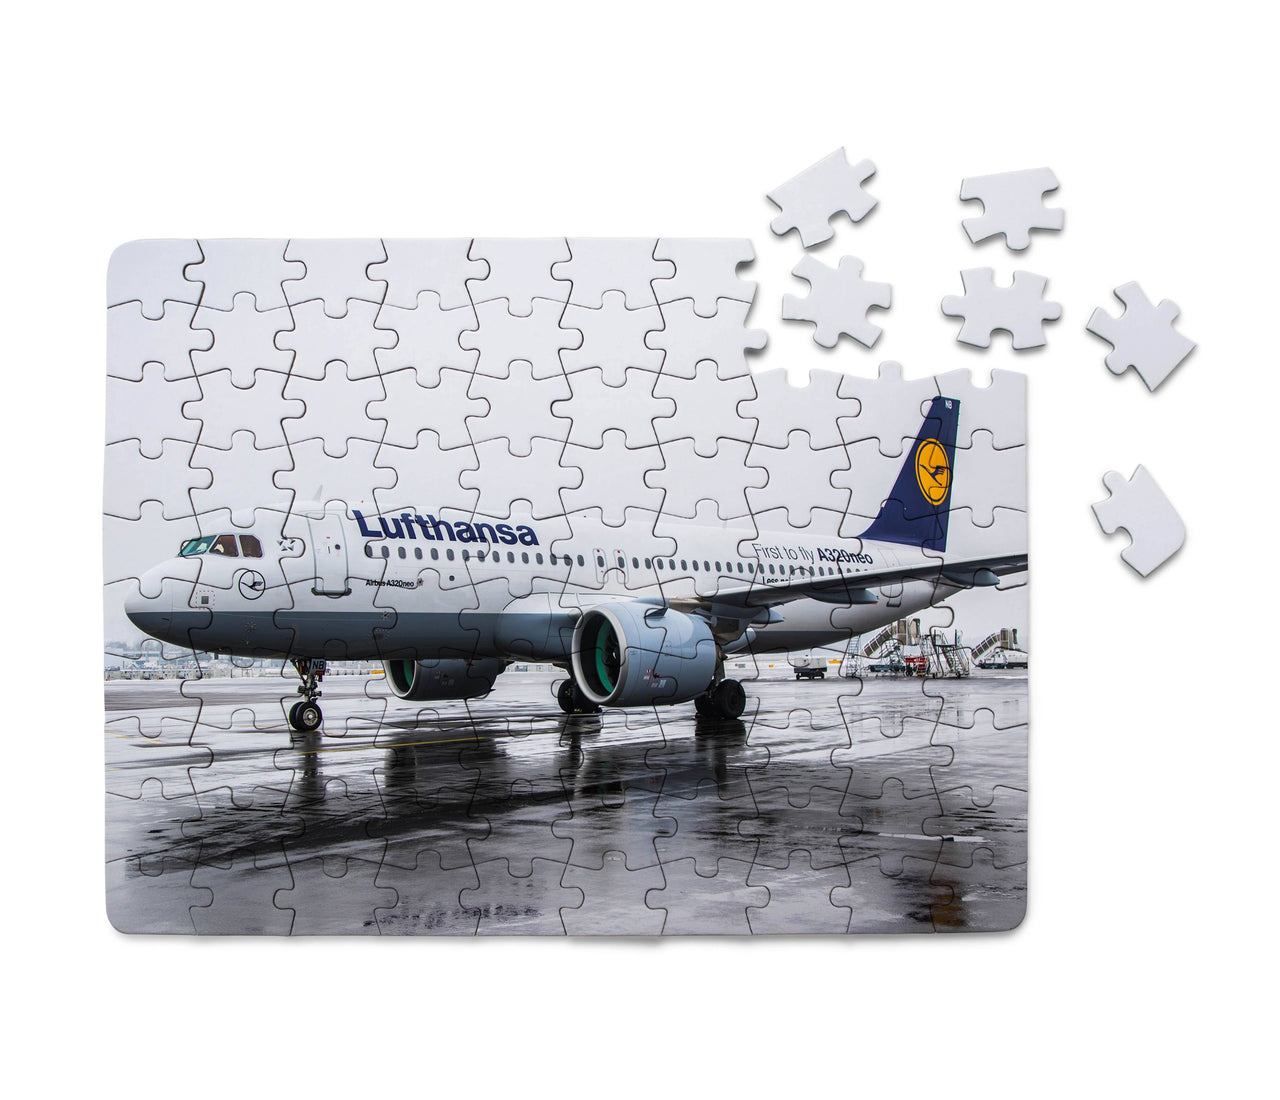 Lufthansa's A320 Neo Printed Puzzles Aviation Shop 